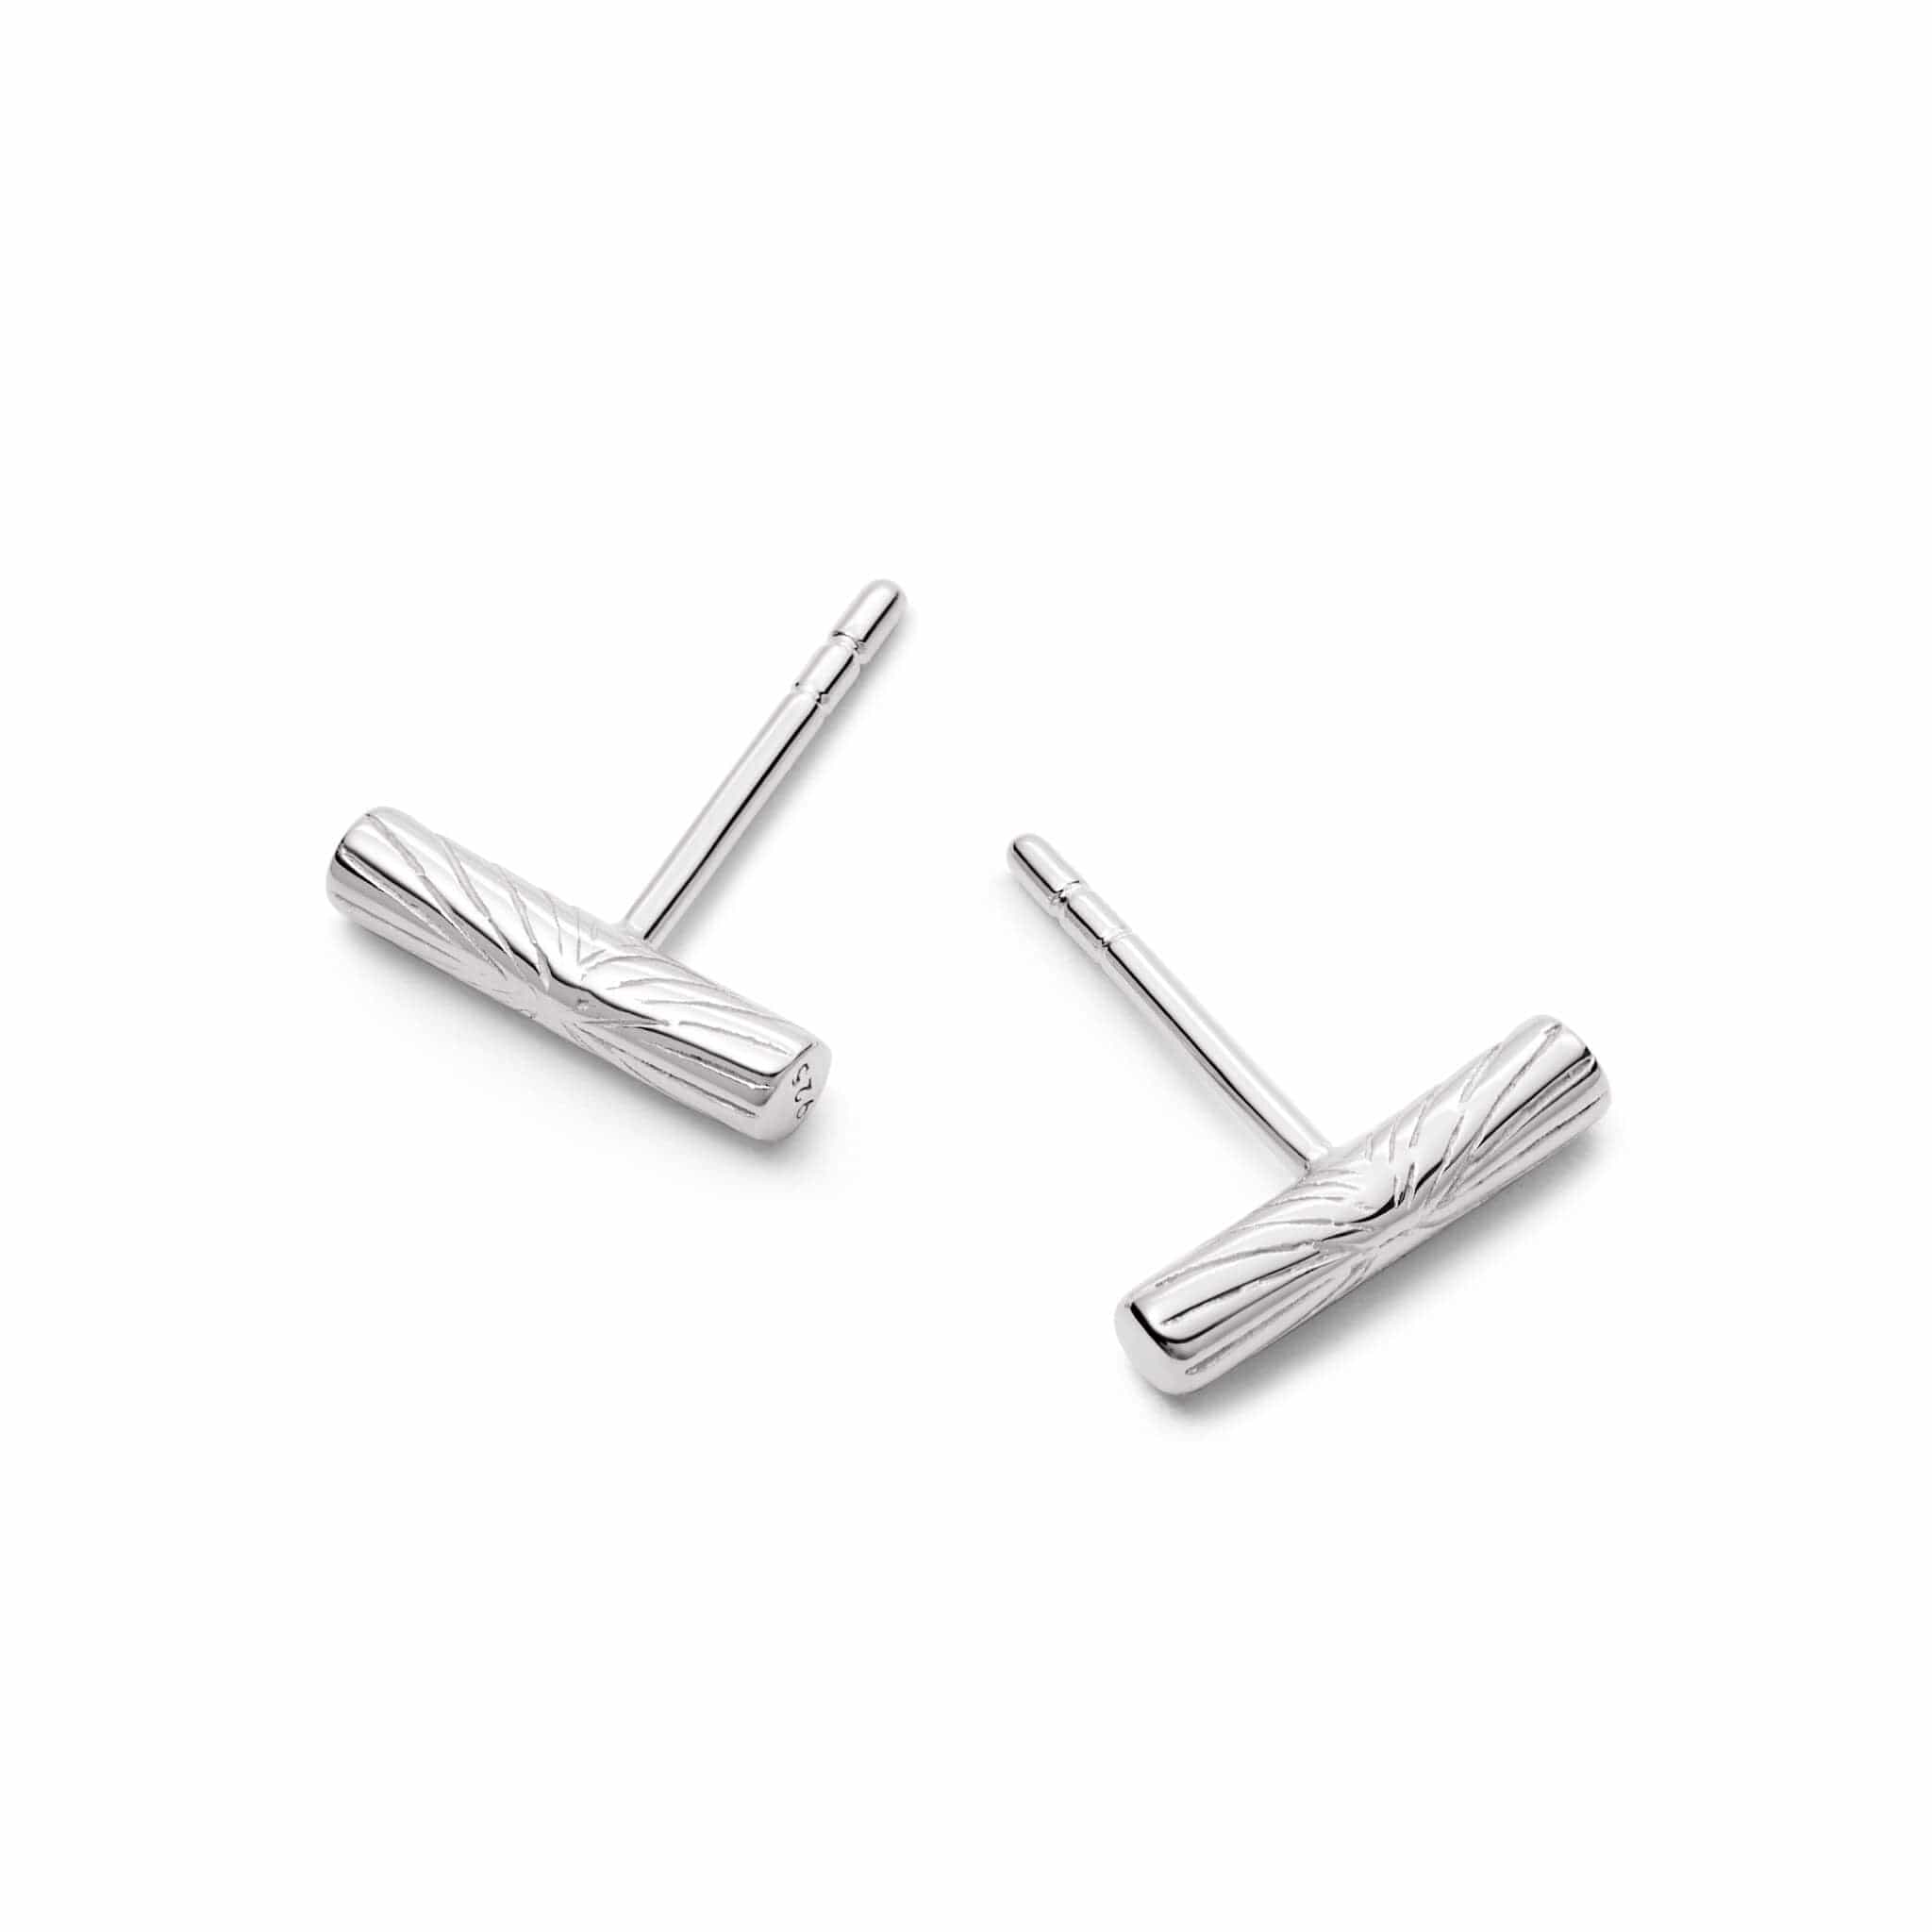 TDi Body Jewellery - NEW! Sterling Silver Bar Stud Earrings. These Sterling  Silver Bars ear studs as simple and elegant. The bars are 1.6mm thick, 12mm  high and come as a pair,